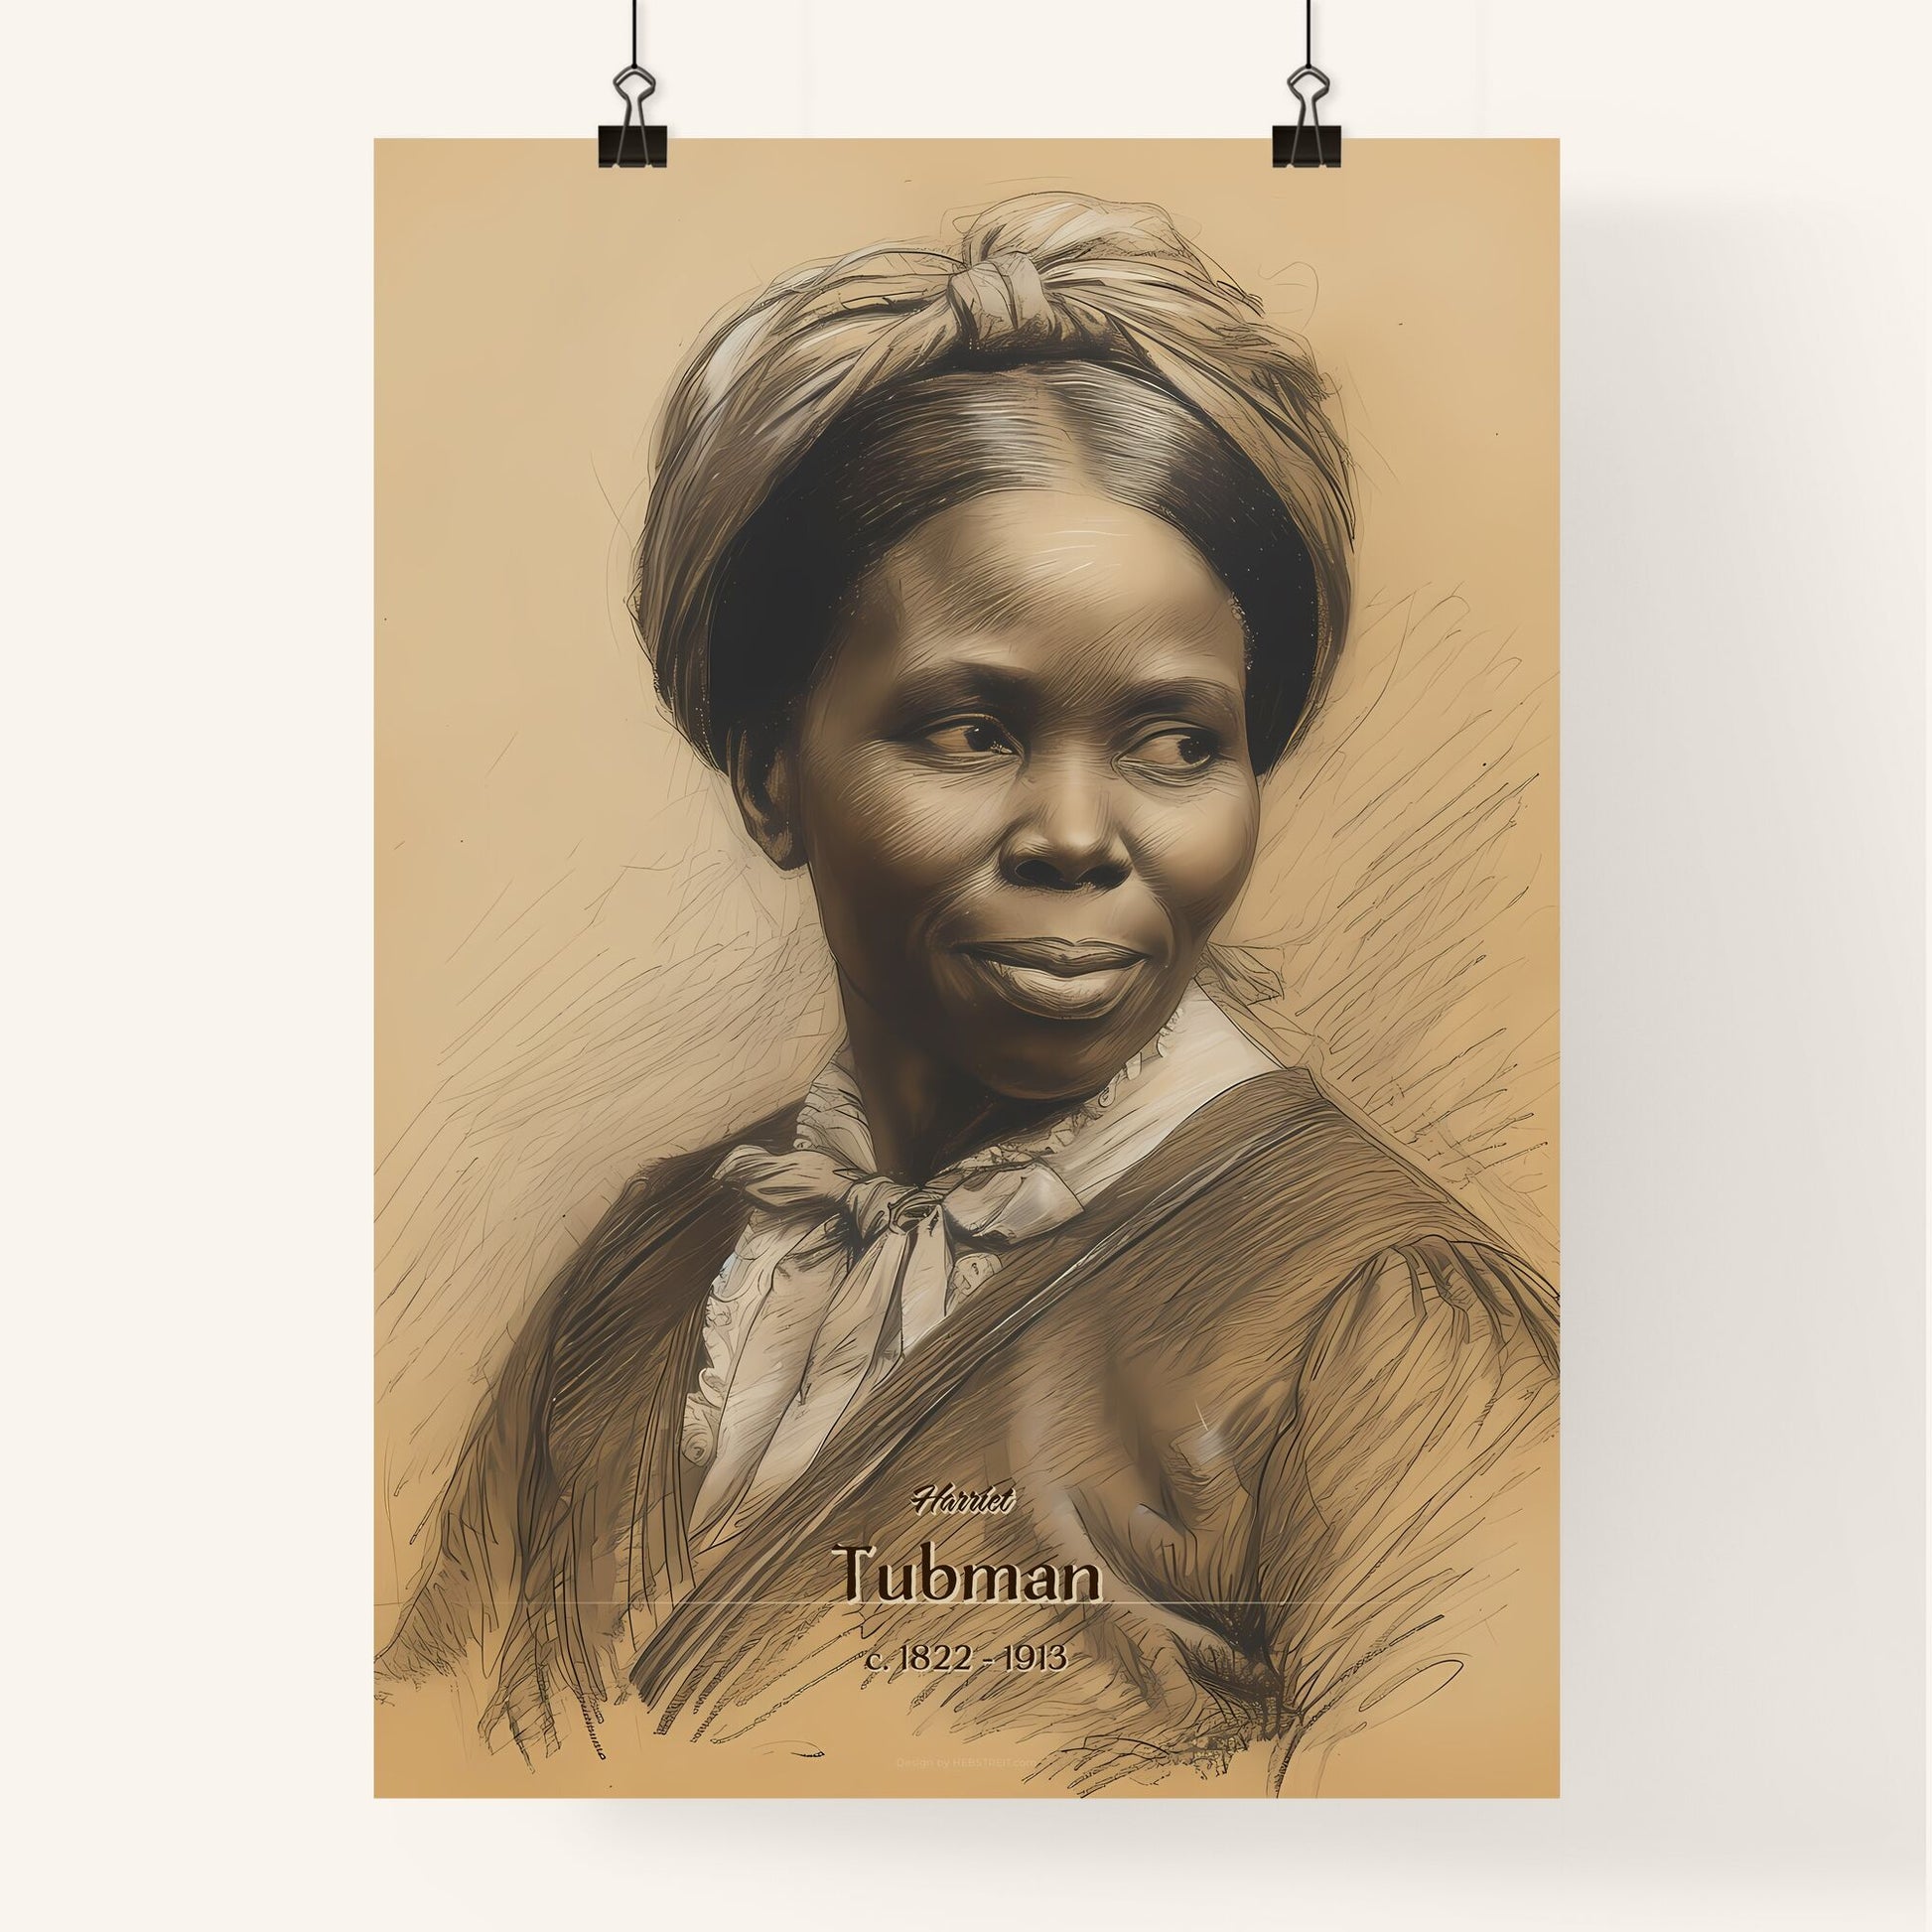 Harriet, Tubman, c. 1822 - 1913, A Poster of a drawing of a woman Default Title